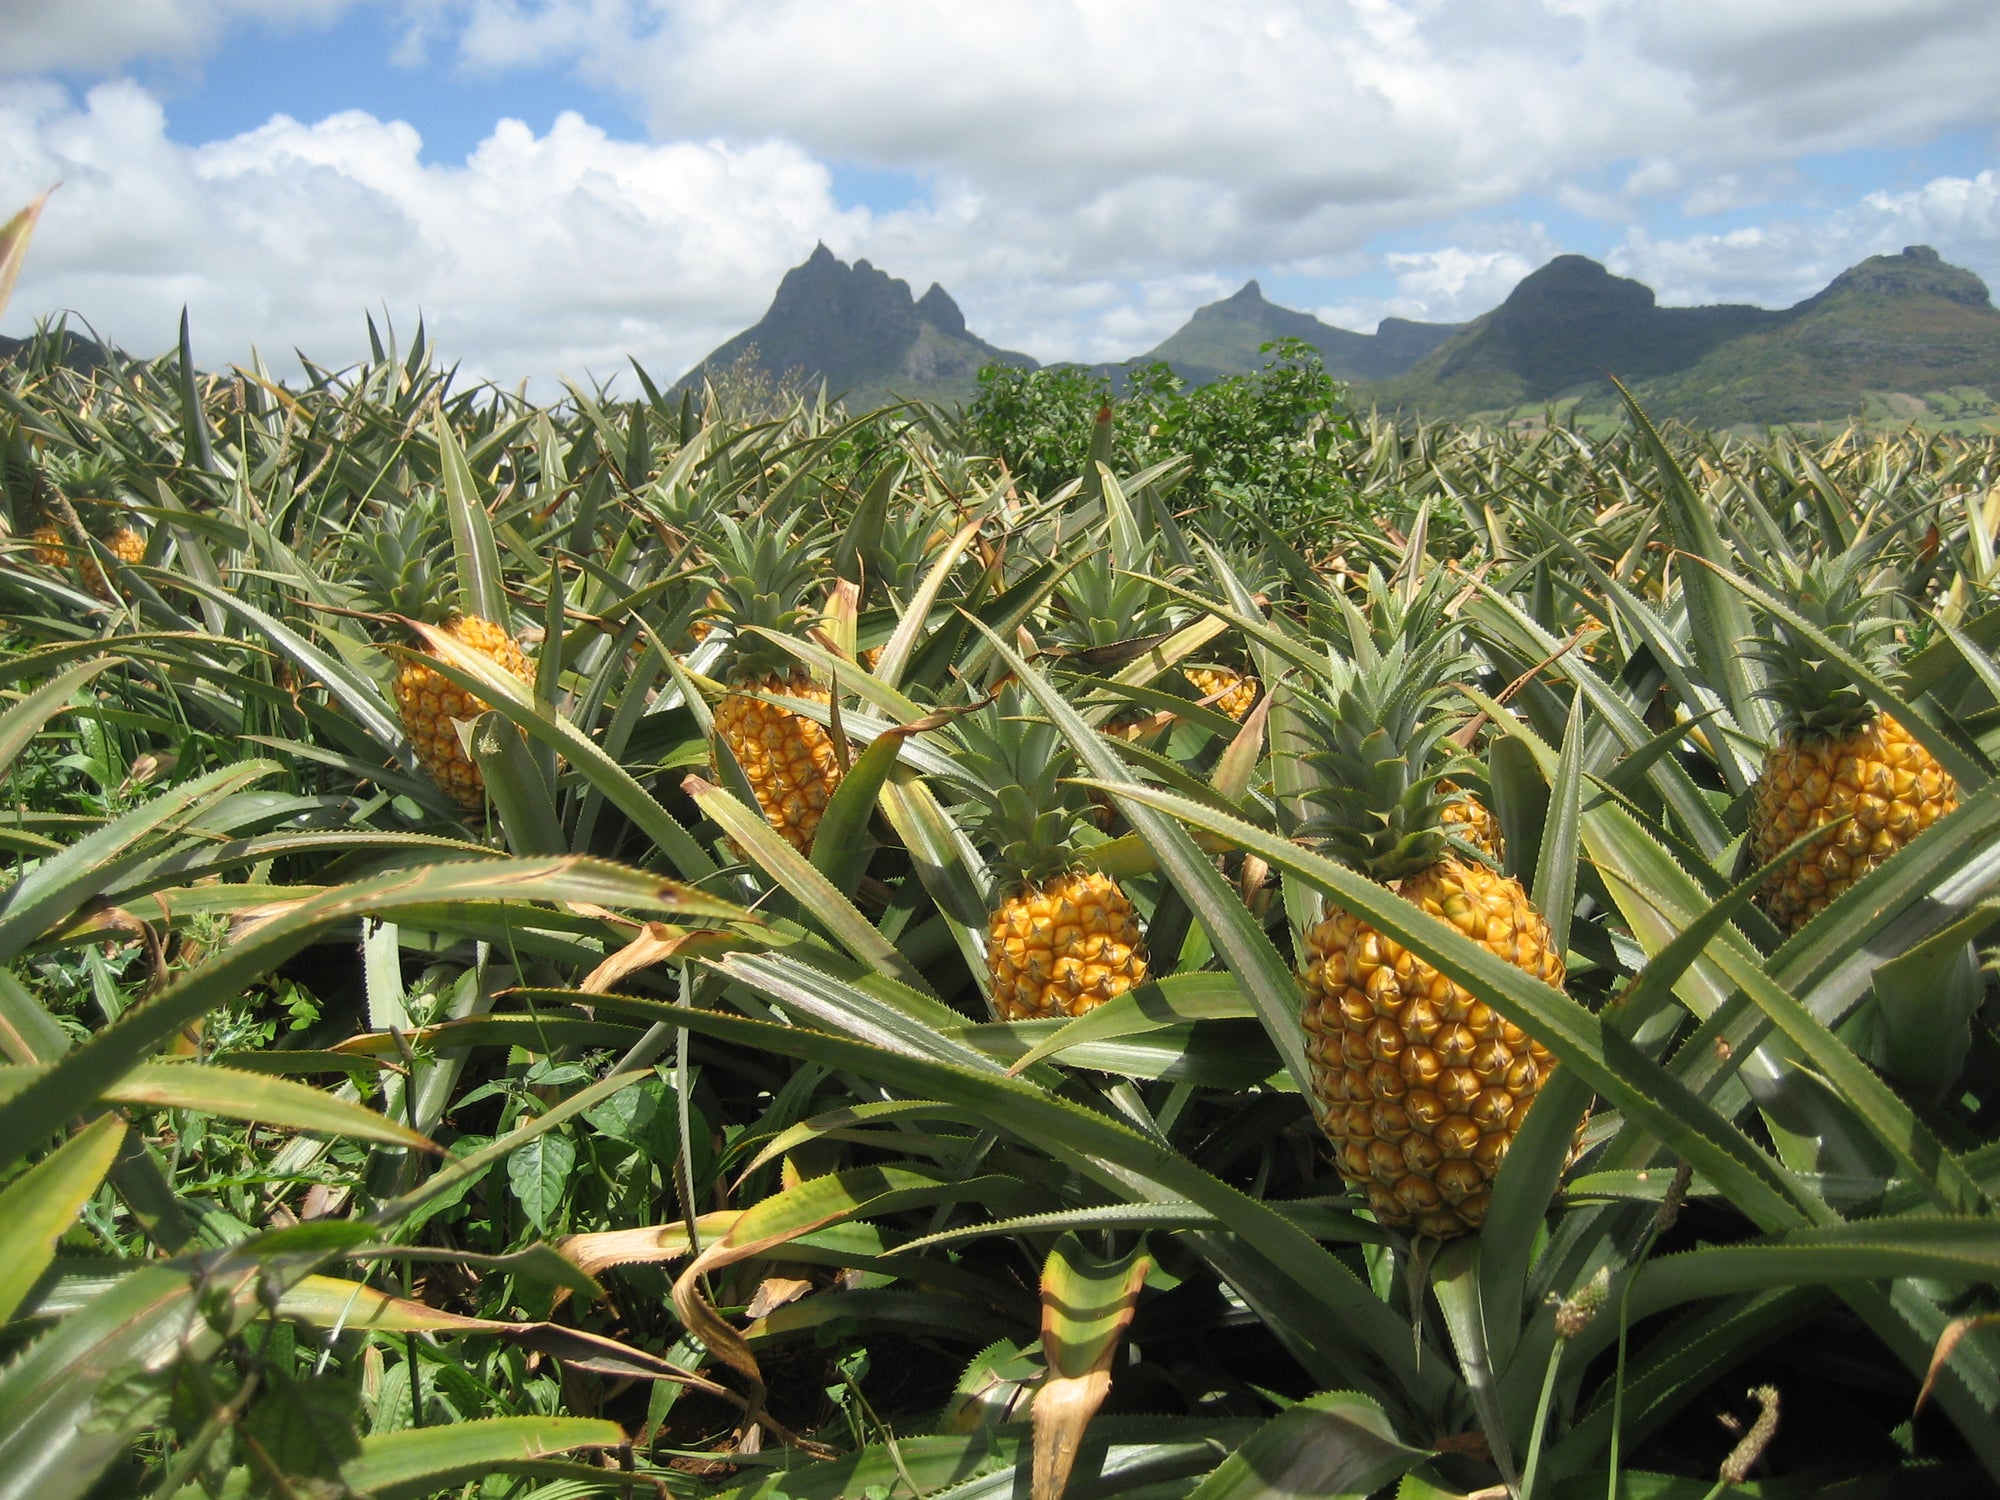 How do you make fabric out of pineapples?